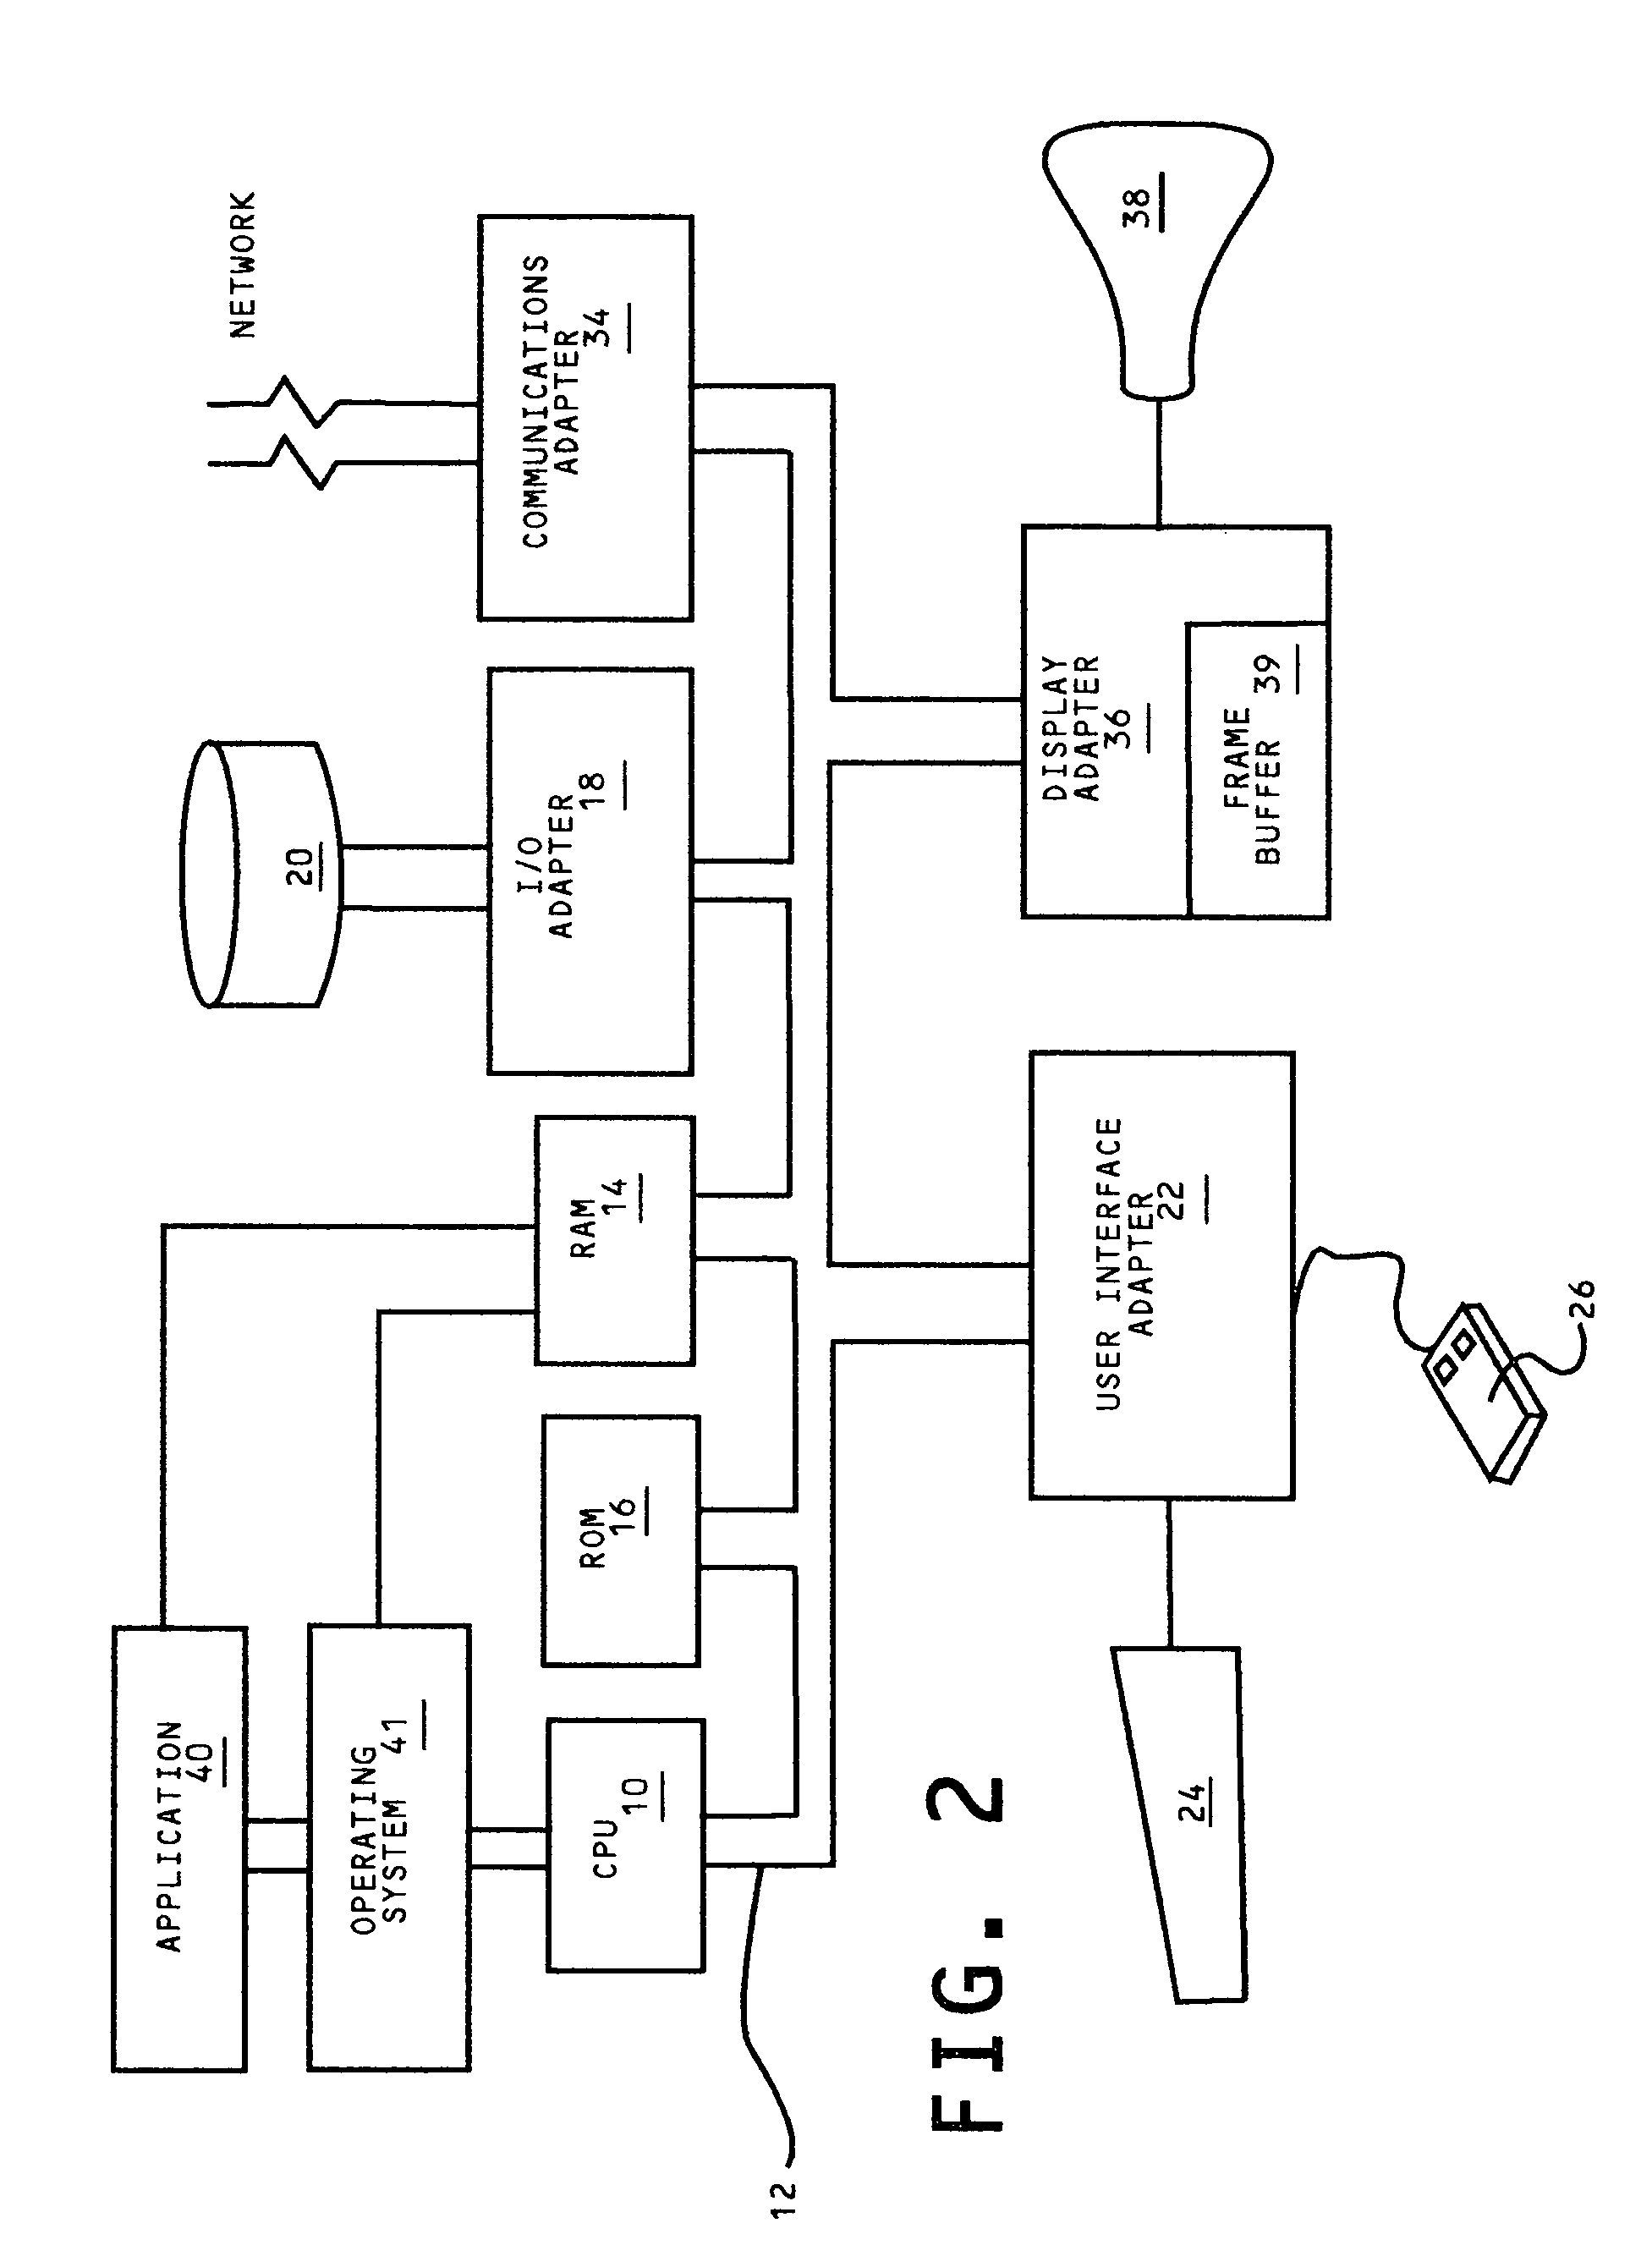 Electronic mail distribution system for permitting the sender of electronic mail to control the redistribution of sent electronic mail messages